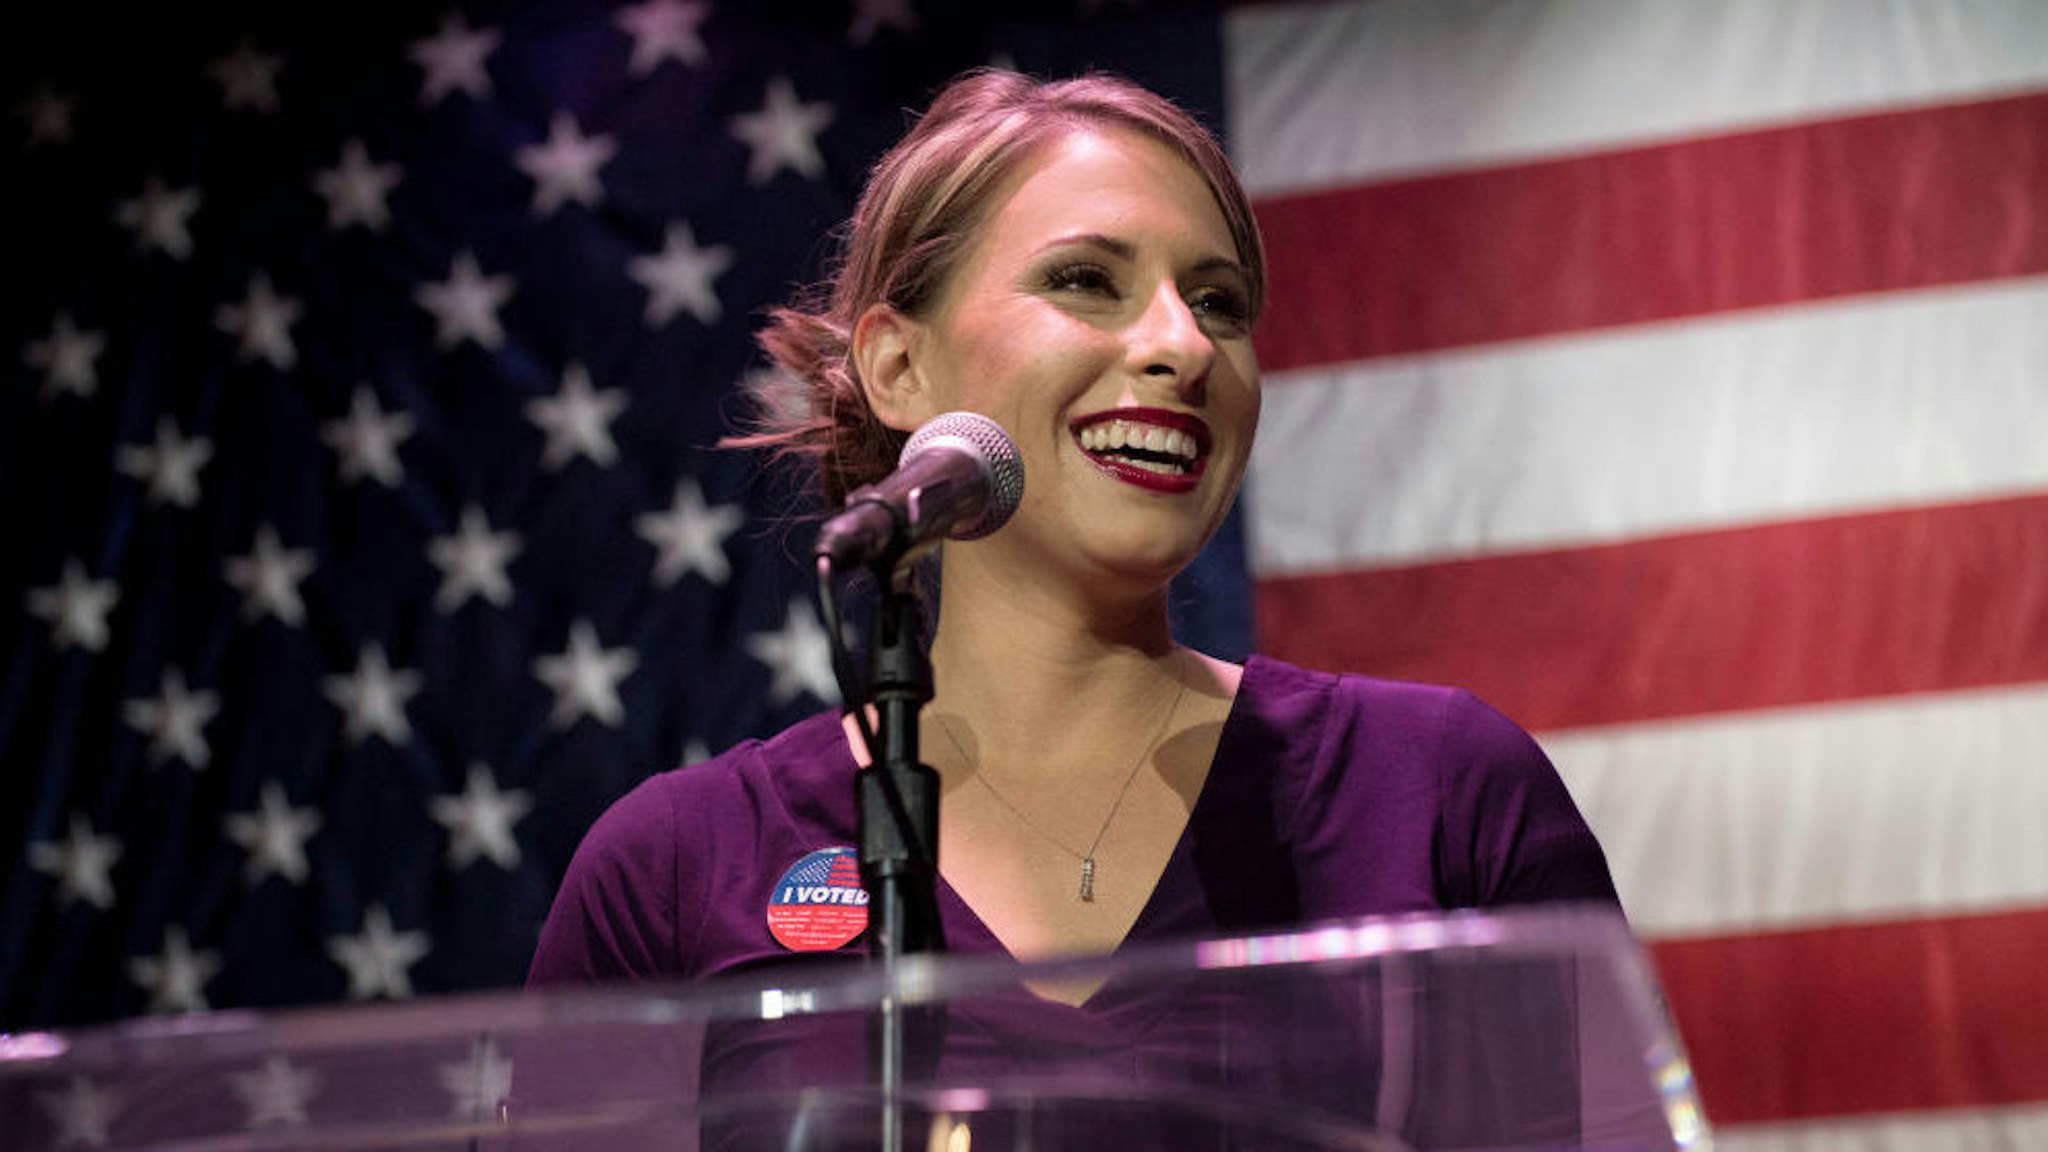 Congressional candidate Katie Hill speaks during her election night watch party at the Canyon in Santa Clarita, CA. Tuesday, Nov 6, 2018. (Photo by Hans Gutknecht/Digital First Media/Los Angeles Daily News via Getty Images)